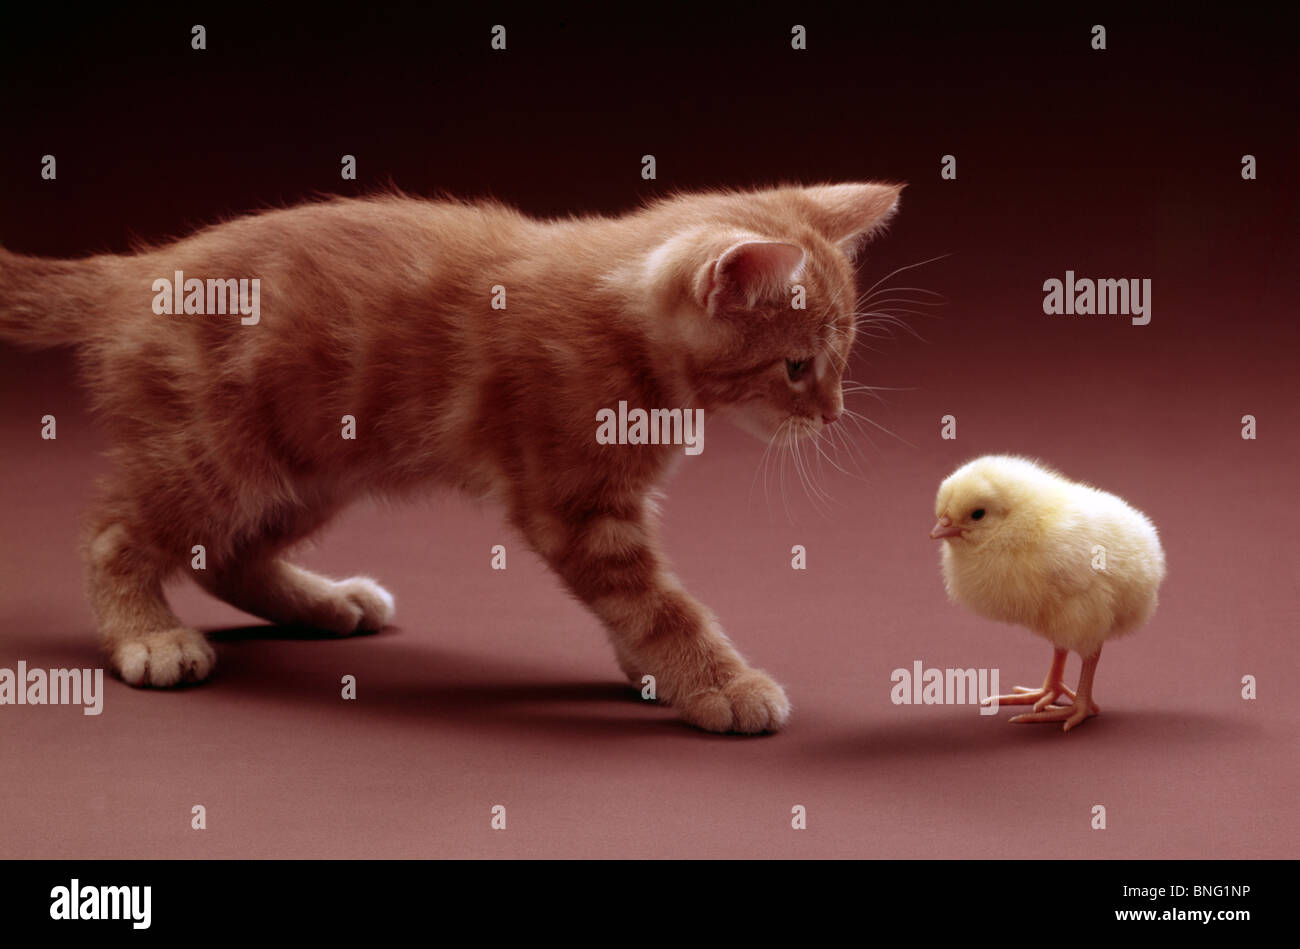 Marmalade kitten confronting with a baby chick Stock Photo